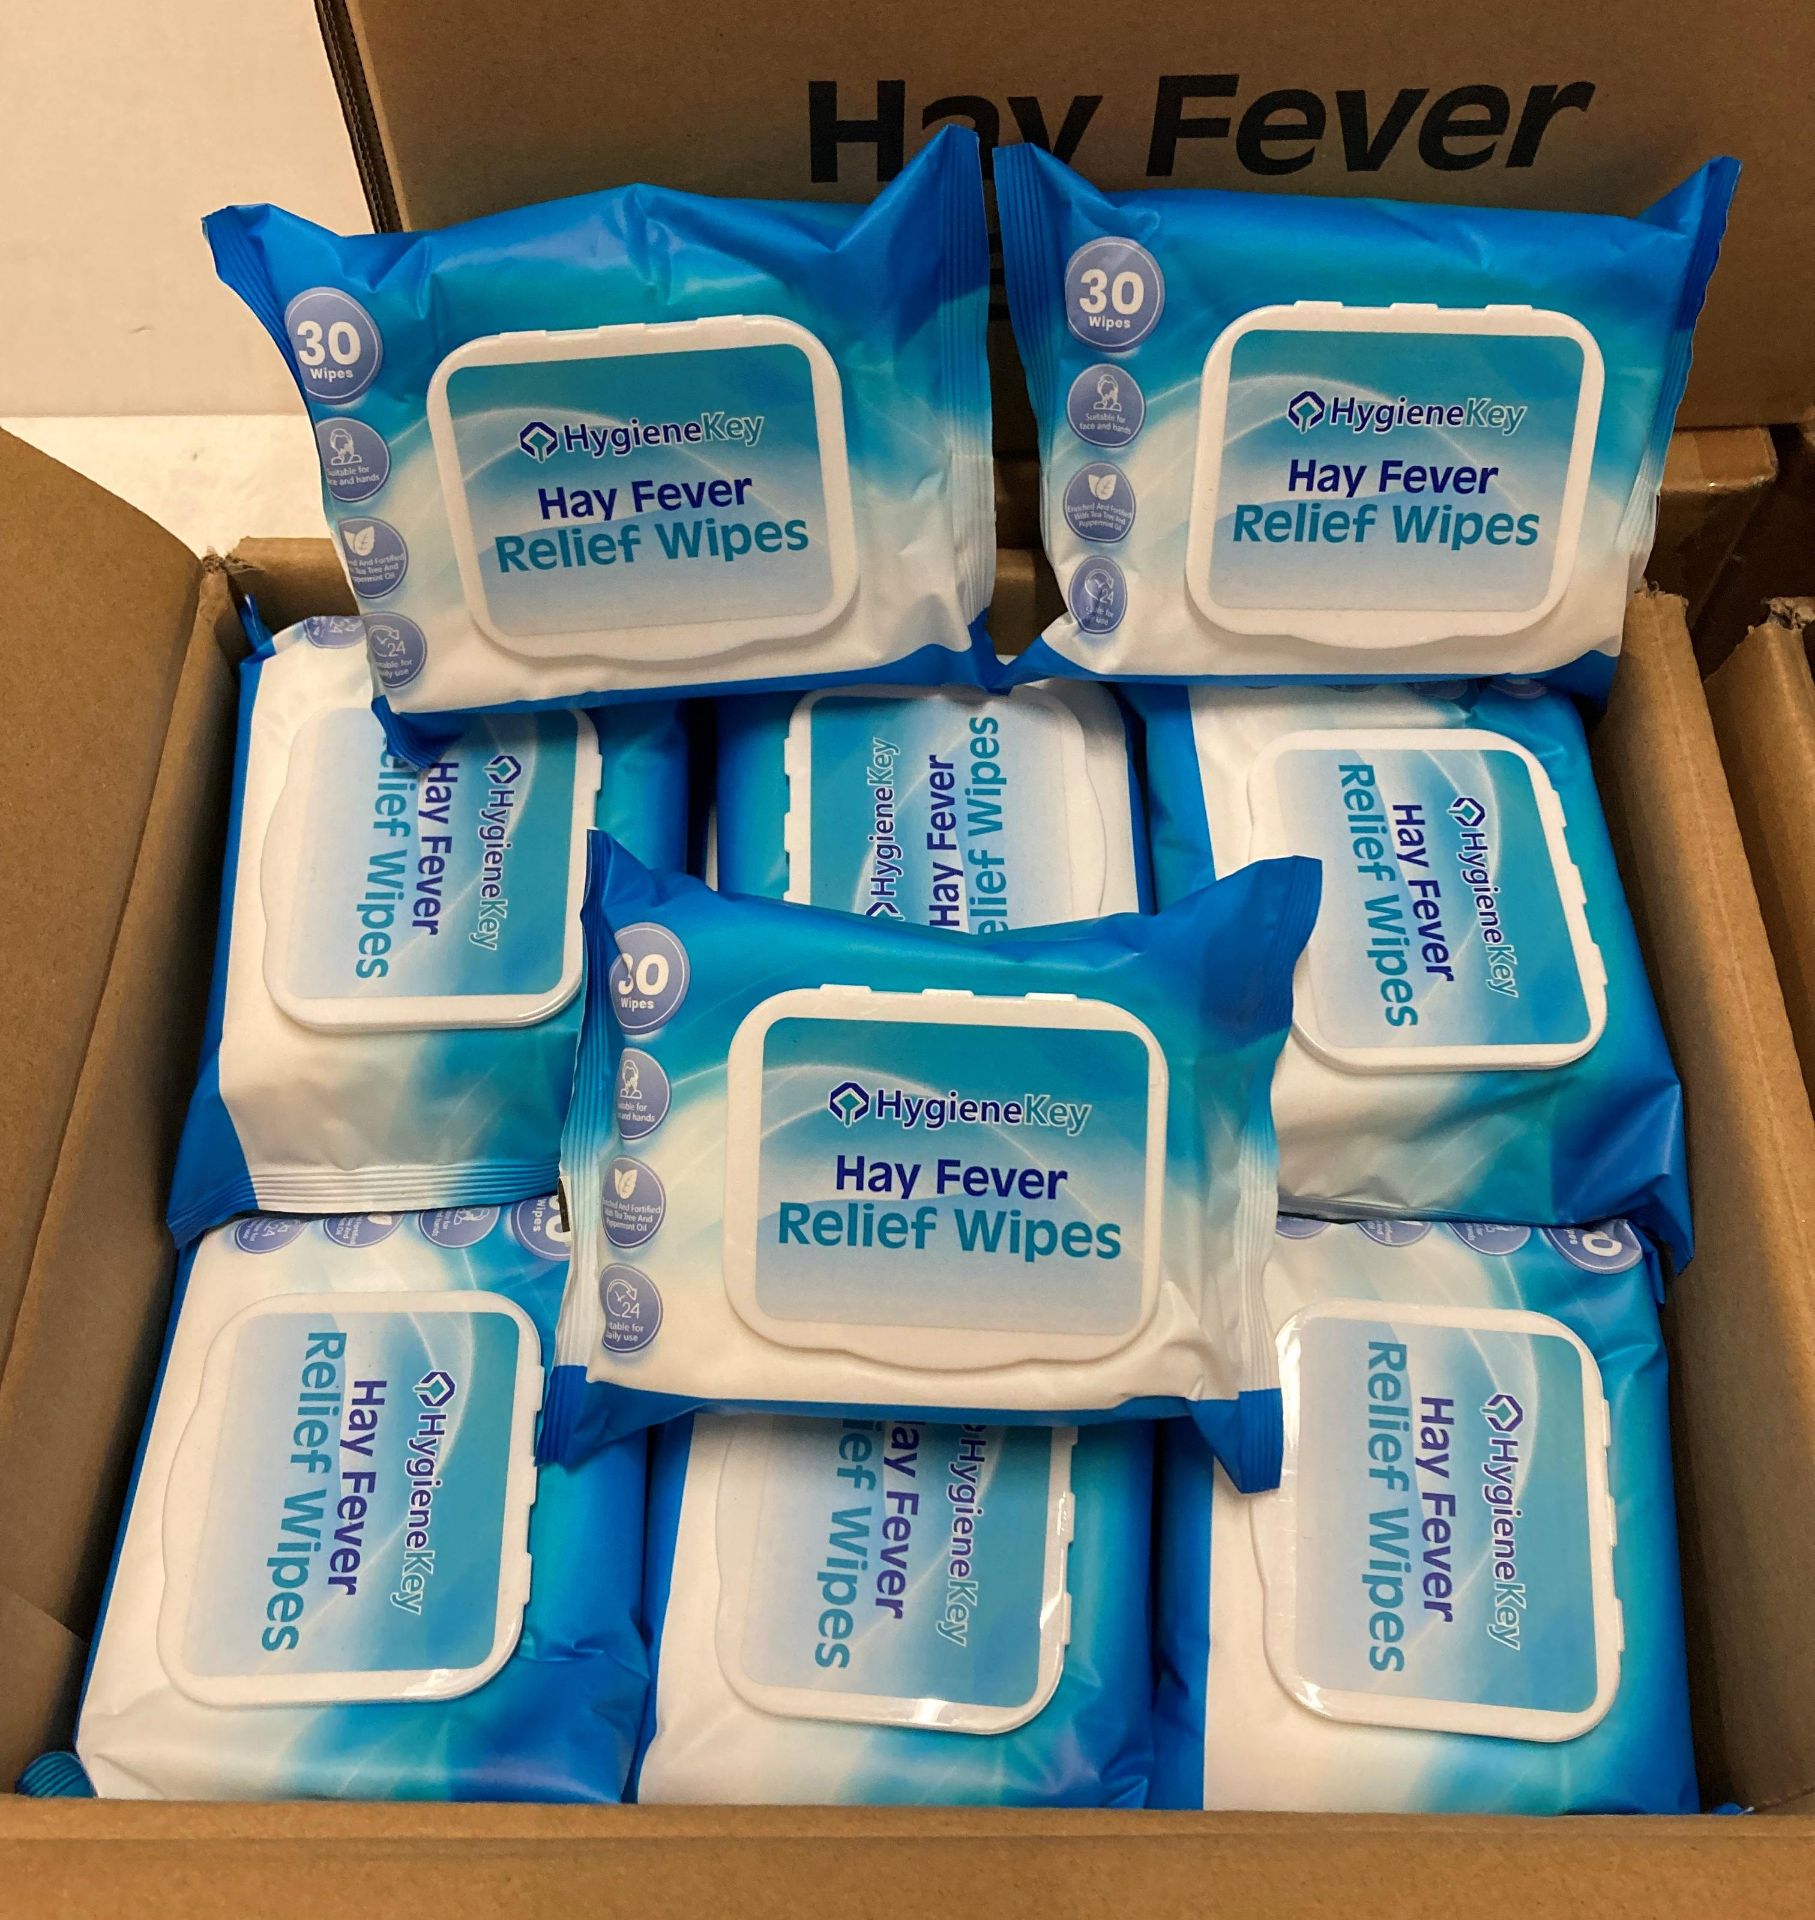 360 x packs of Hygiene Key hay fever relief wipes (30 x wipes per pack - expiry date: 30/05/24) - - Bild 2 aus 2